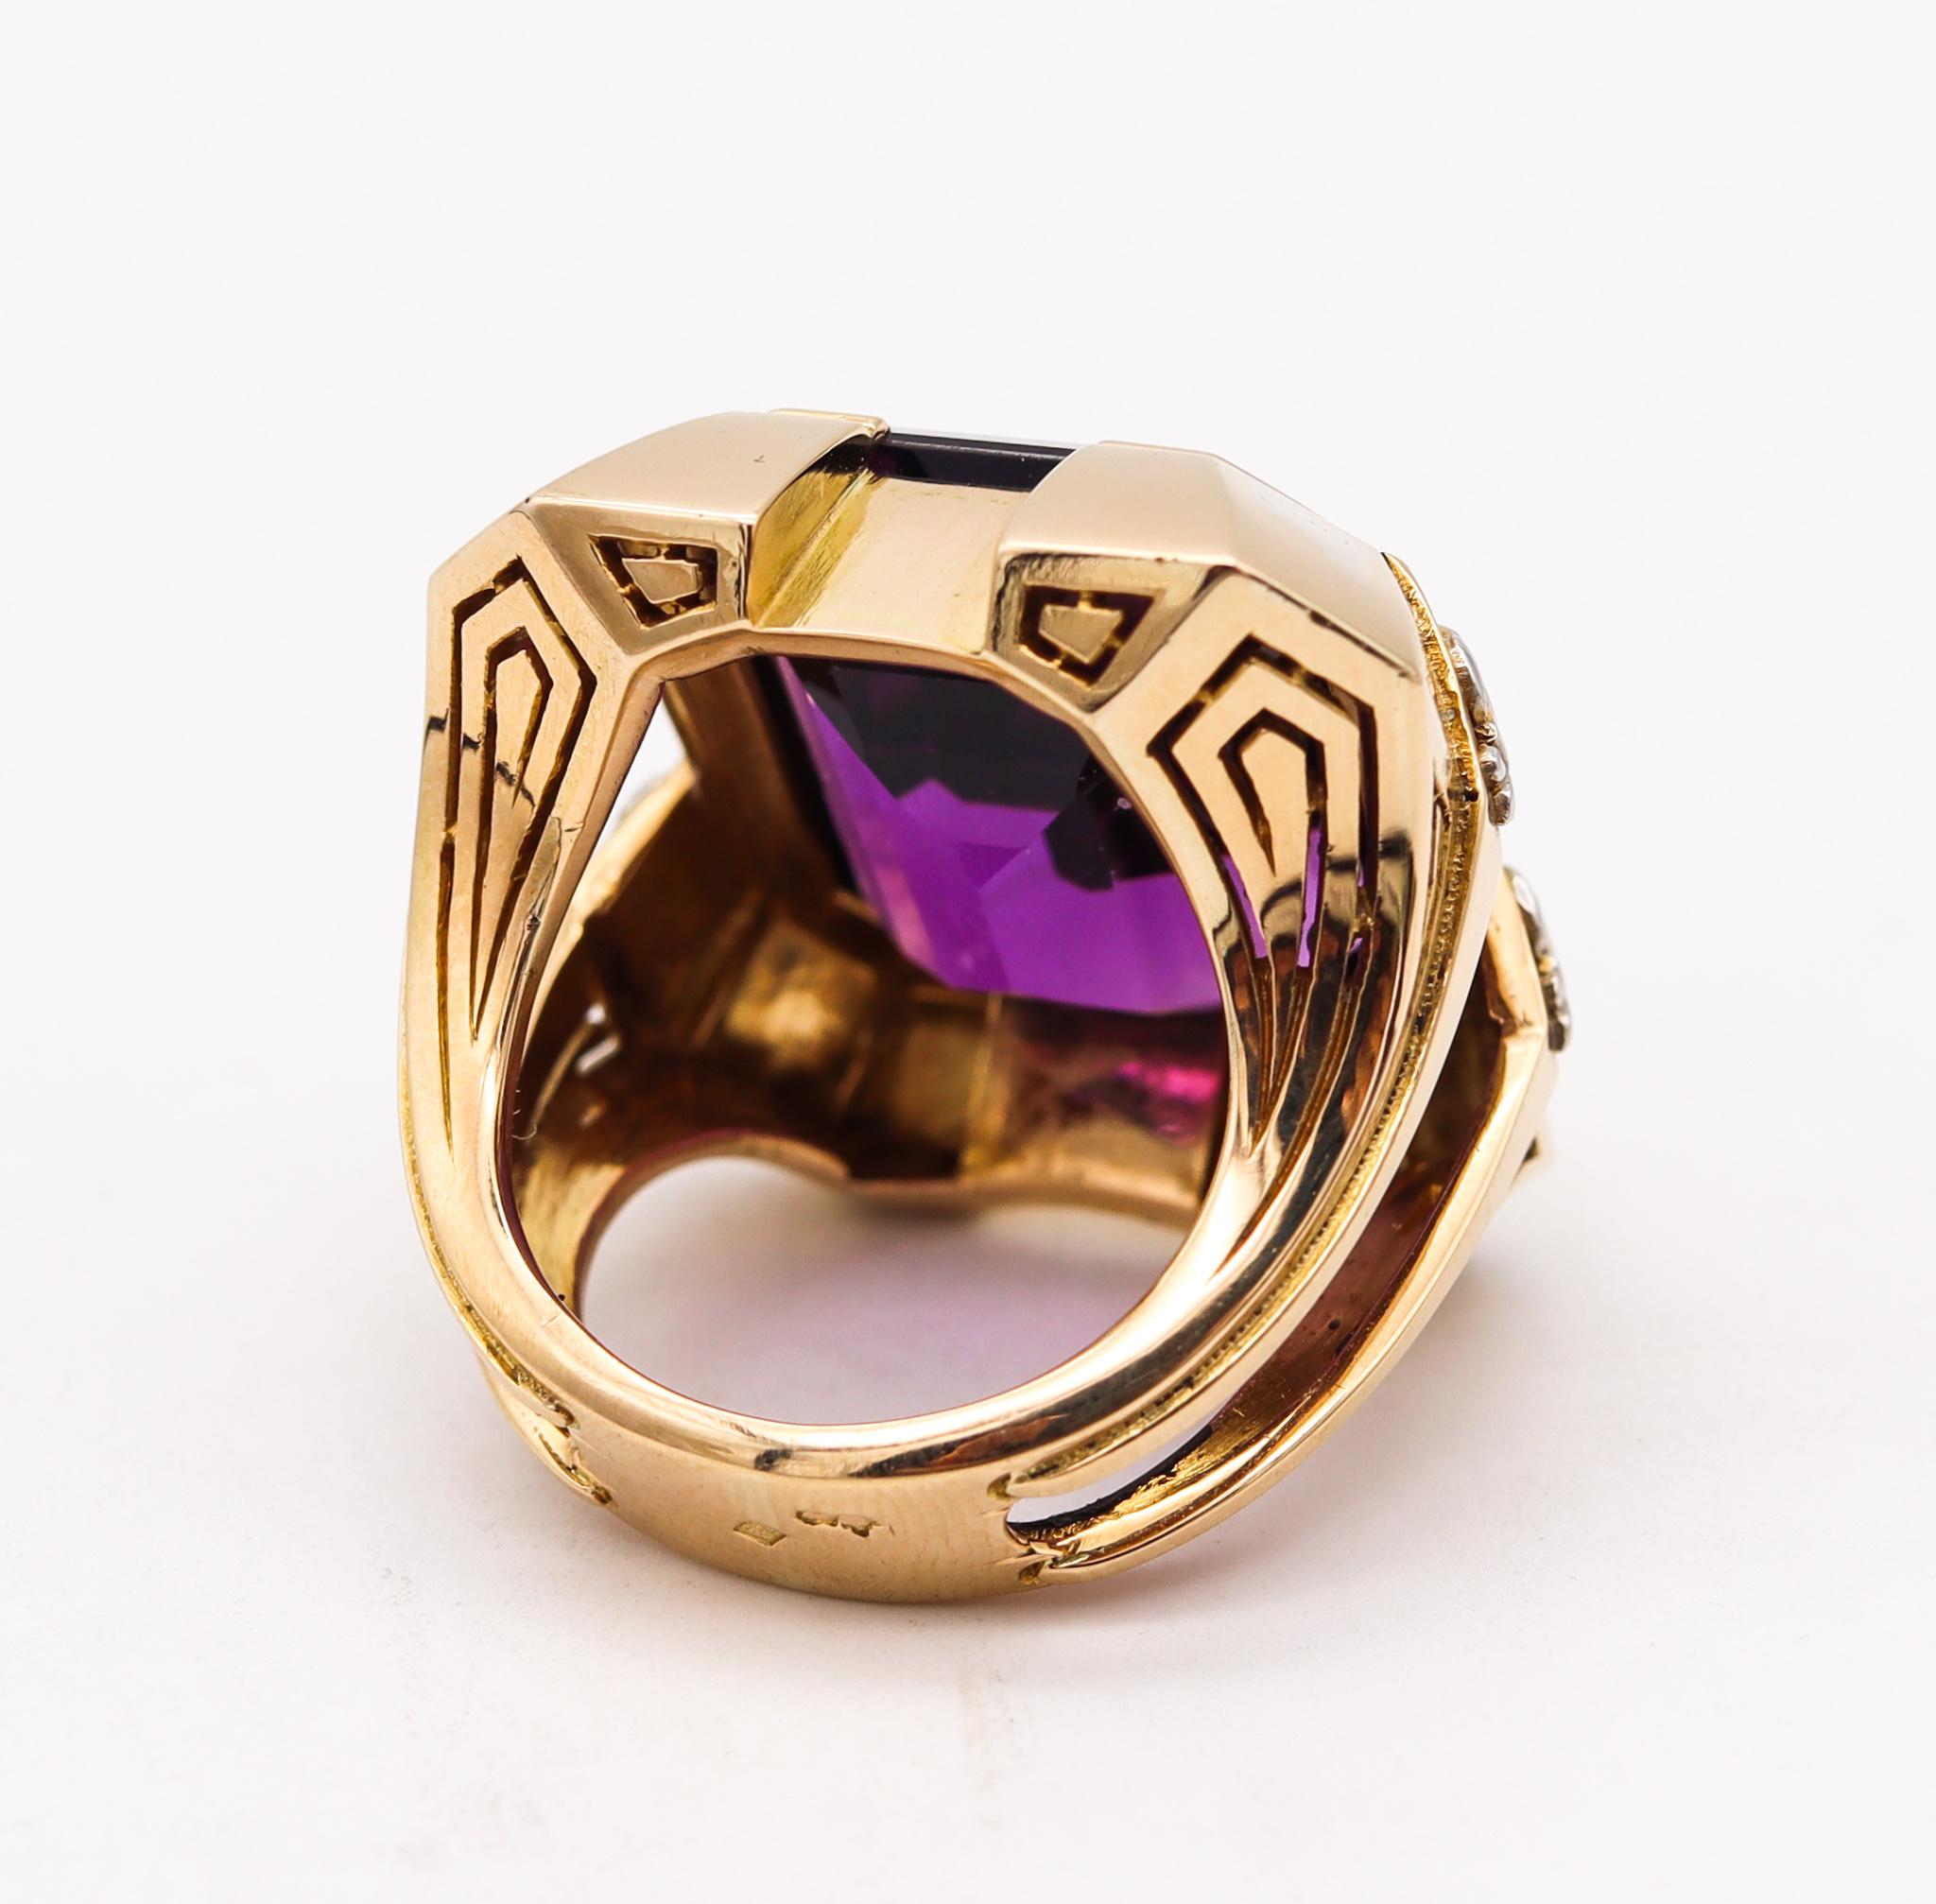 Emerald Cut Marchak Paris 1930 Art Deco Geometric Ring In 18Kt Gold With 42.84 Cts Amethyst For Sale